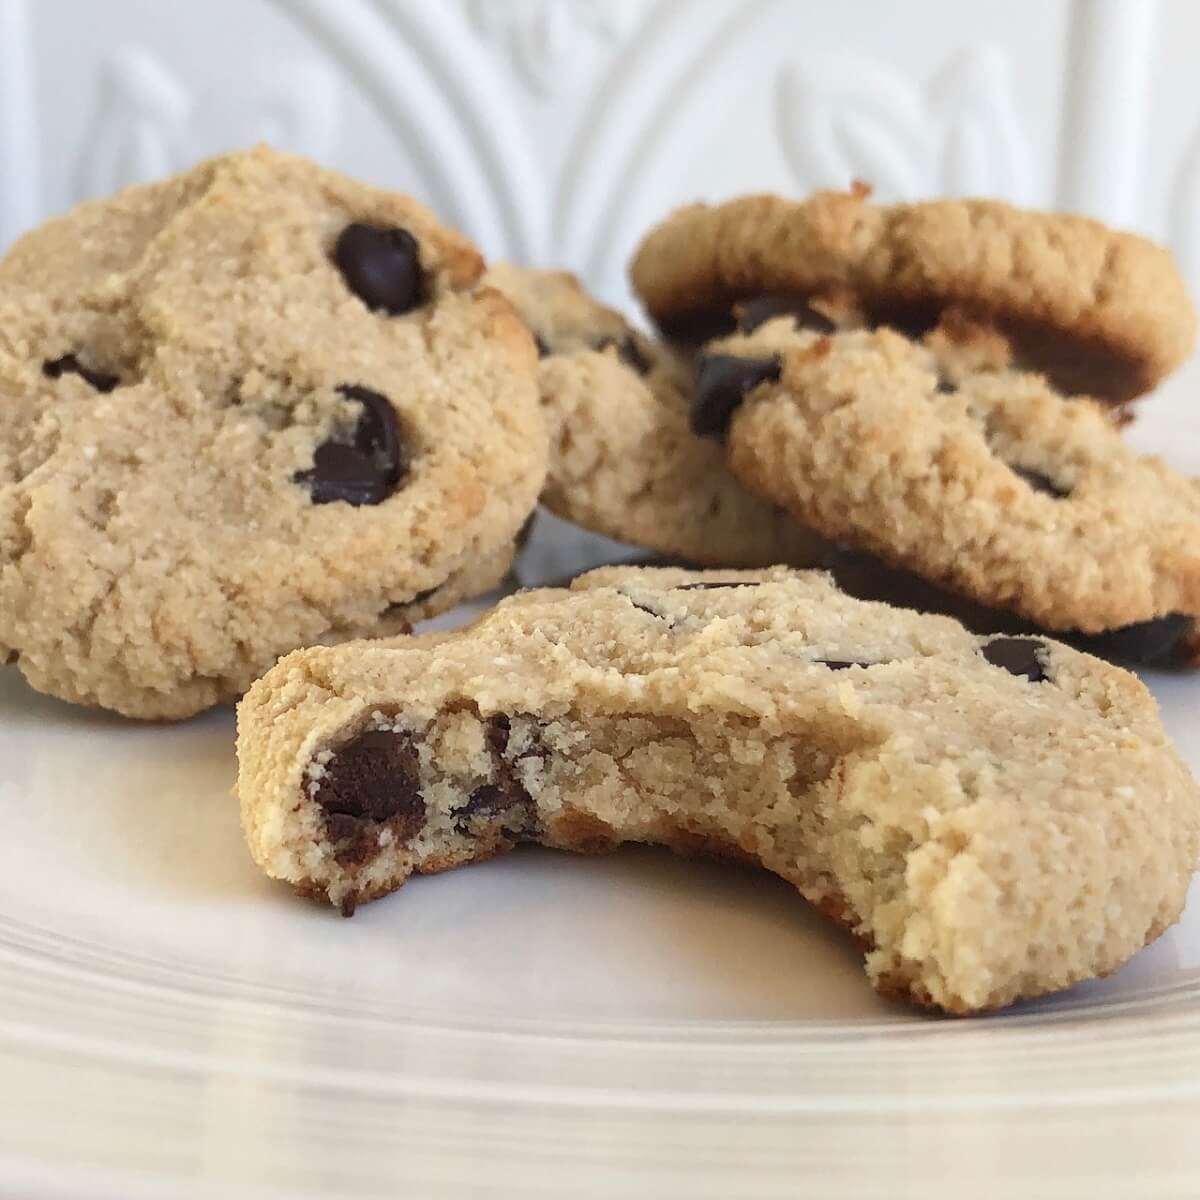 A pile of chocolate chip cookies with a bite missing from one.